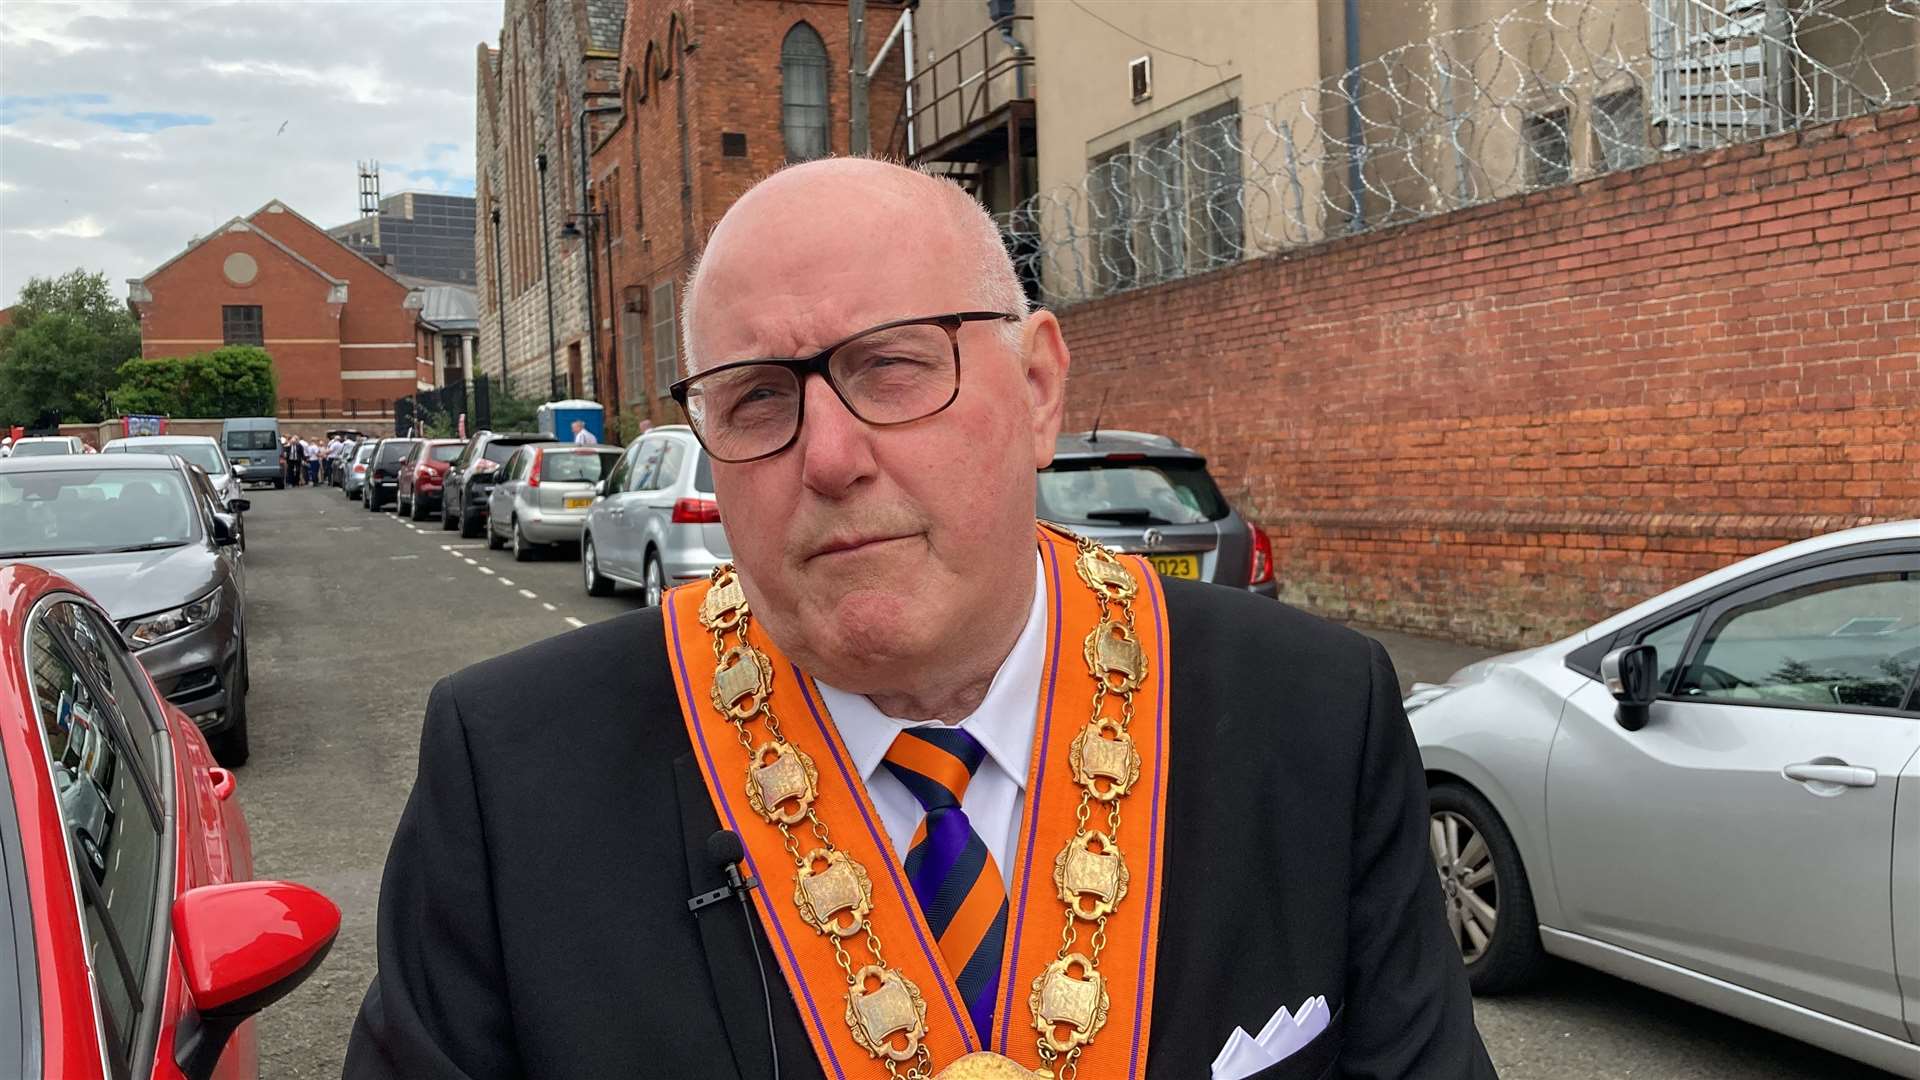 The Orange Order’s County Grand Master for Belfast, Spencer Beattie, speaks ahead of a July 12 parade in the capital (Rebecca Black/PA)